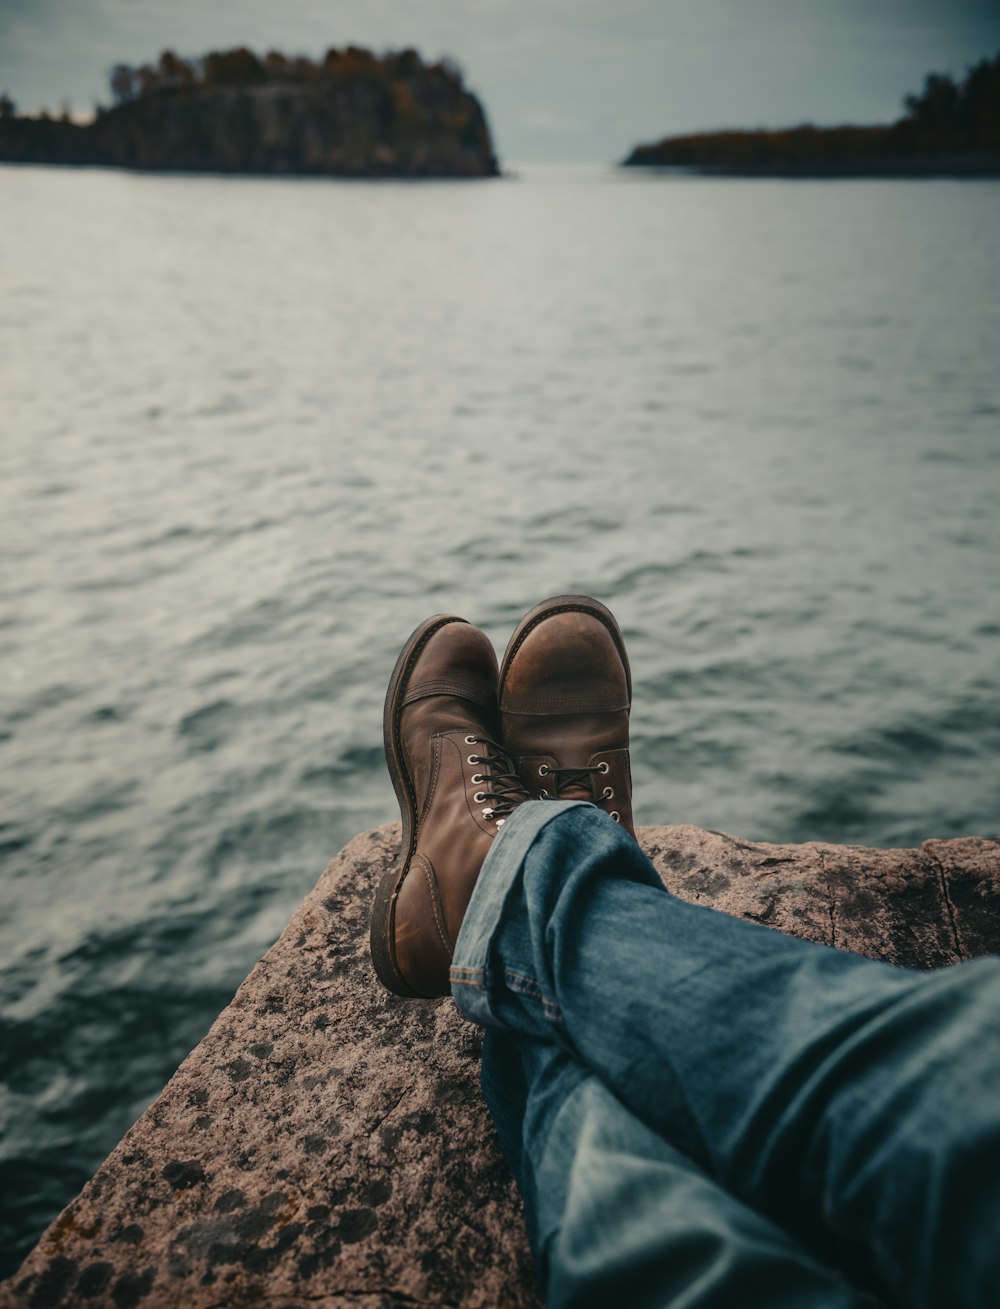 person in blue denim jeans and brown leather boots sitting on rock near body of water